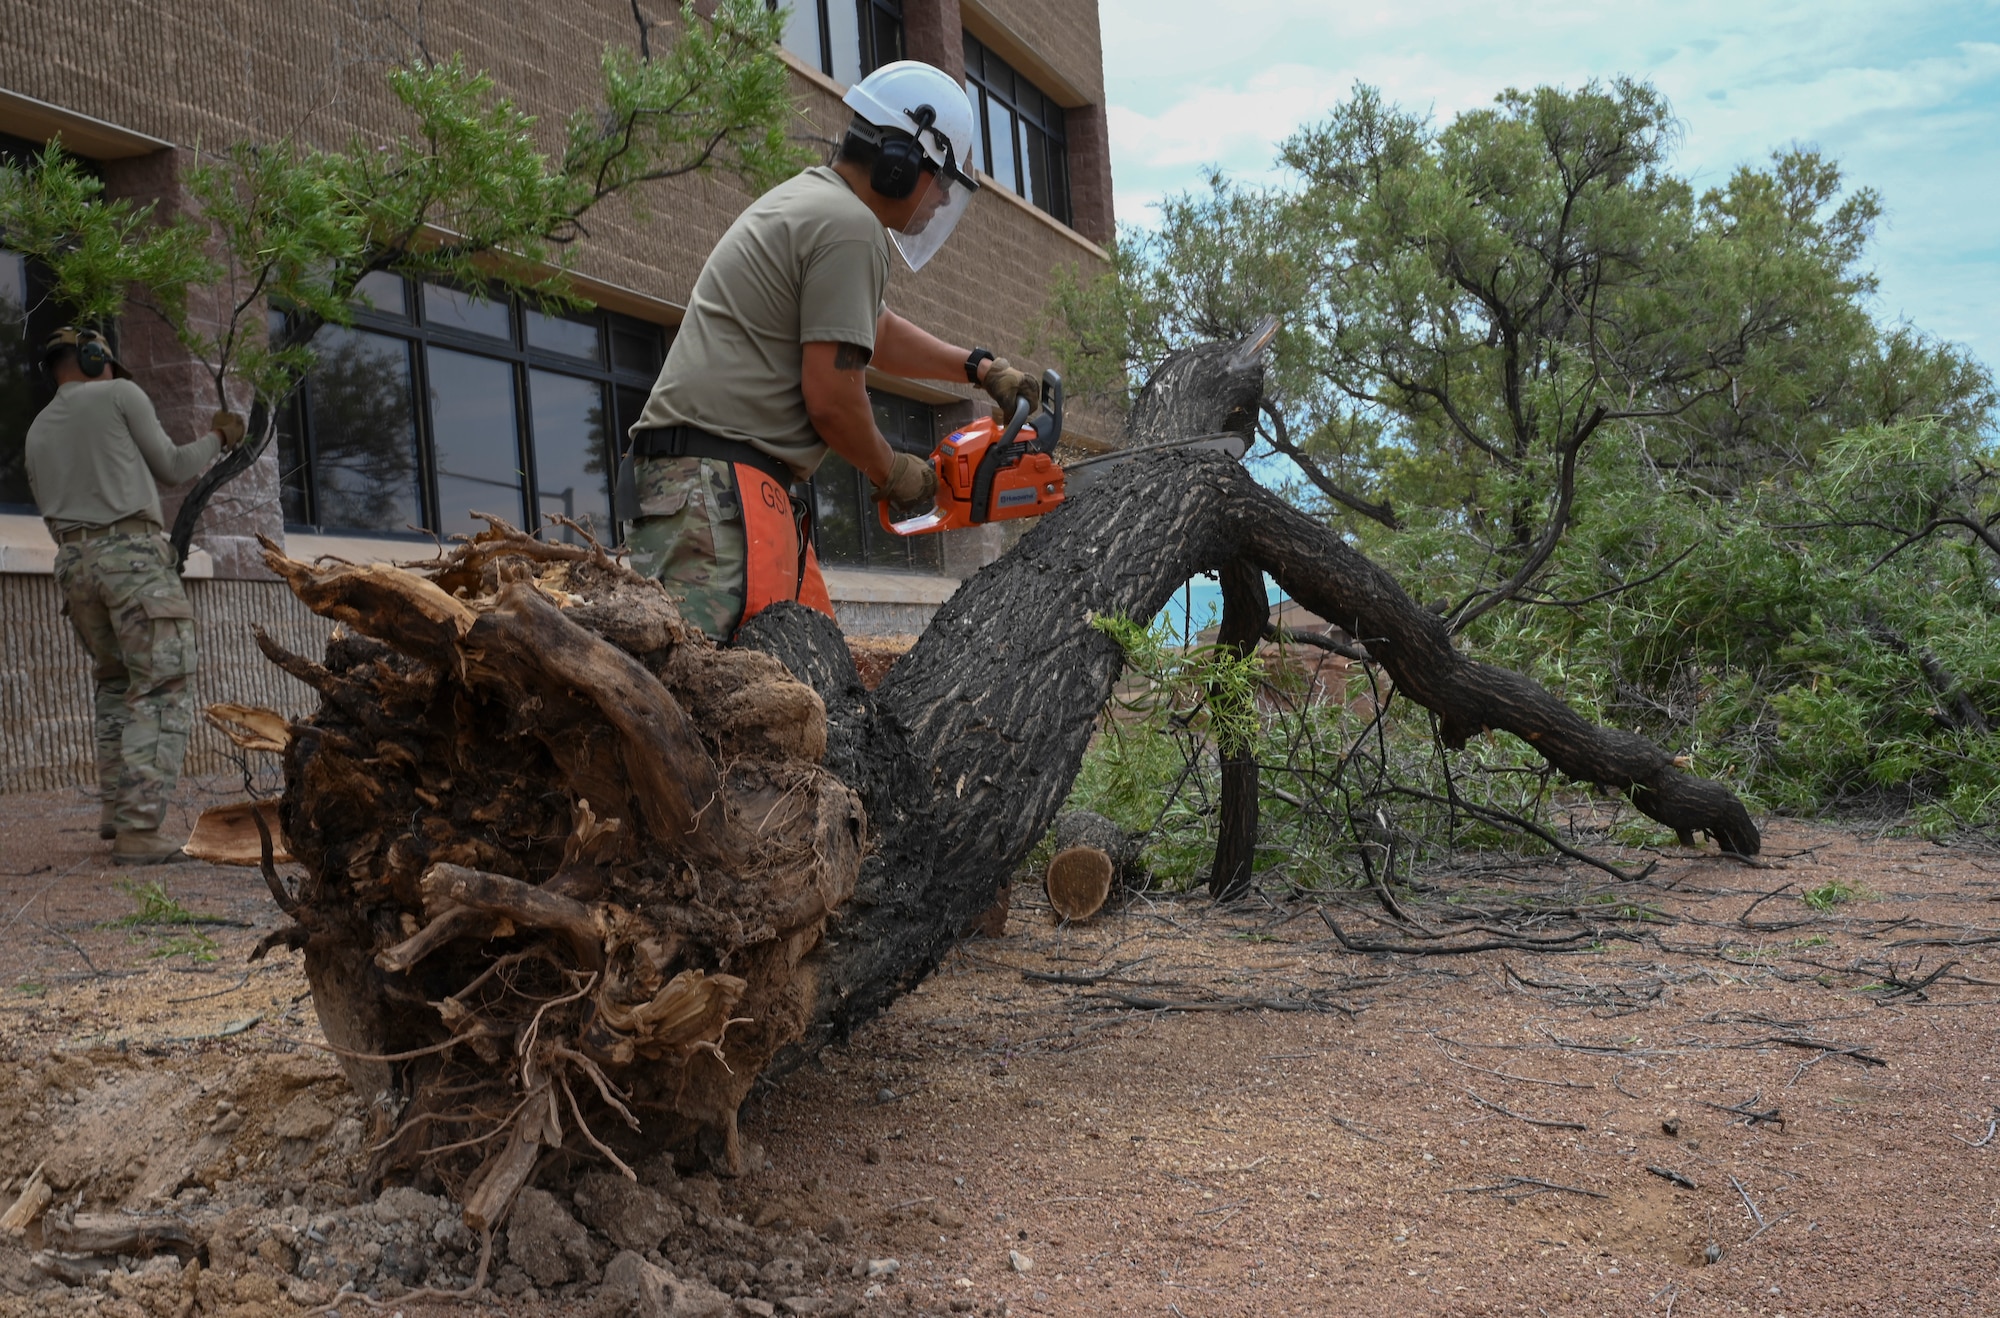 U.S. Air Force Tech. Sgt. Alonzo Marquez, 49th Civil Engineer Squadron pavements and construction equipment noncommissioned officer in charge, uses a chainsaw to remove debris of a fallen tree at Holloman Air Force Base, New Mexico, June 29, 2023. The 49th CES “Dirt Boyz” Airmen are responsible for maintaining Holloman’s infrastructure by using a variety of tools to complete construction projects. (U.S. Air Force photo by Airman 1st Class Michelle Ferrari)